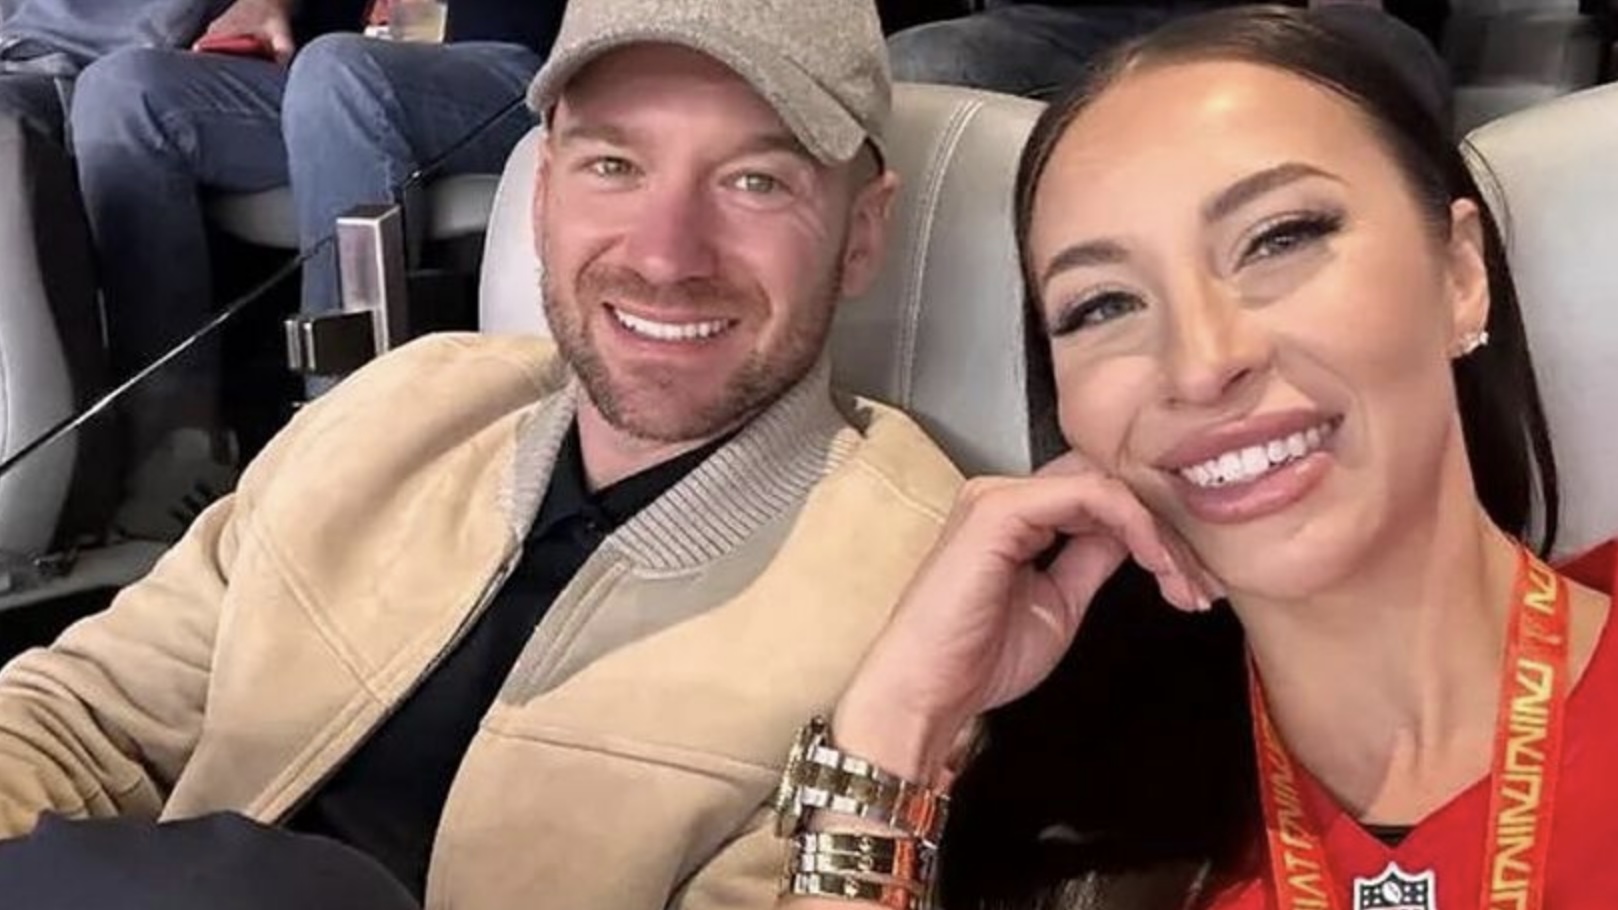 Sean Evans reportedly ends relationship with Melissa Stratton due to her adult career